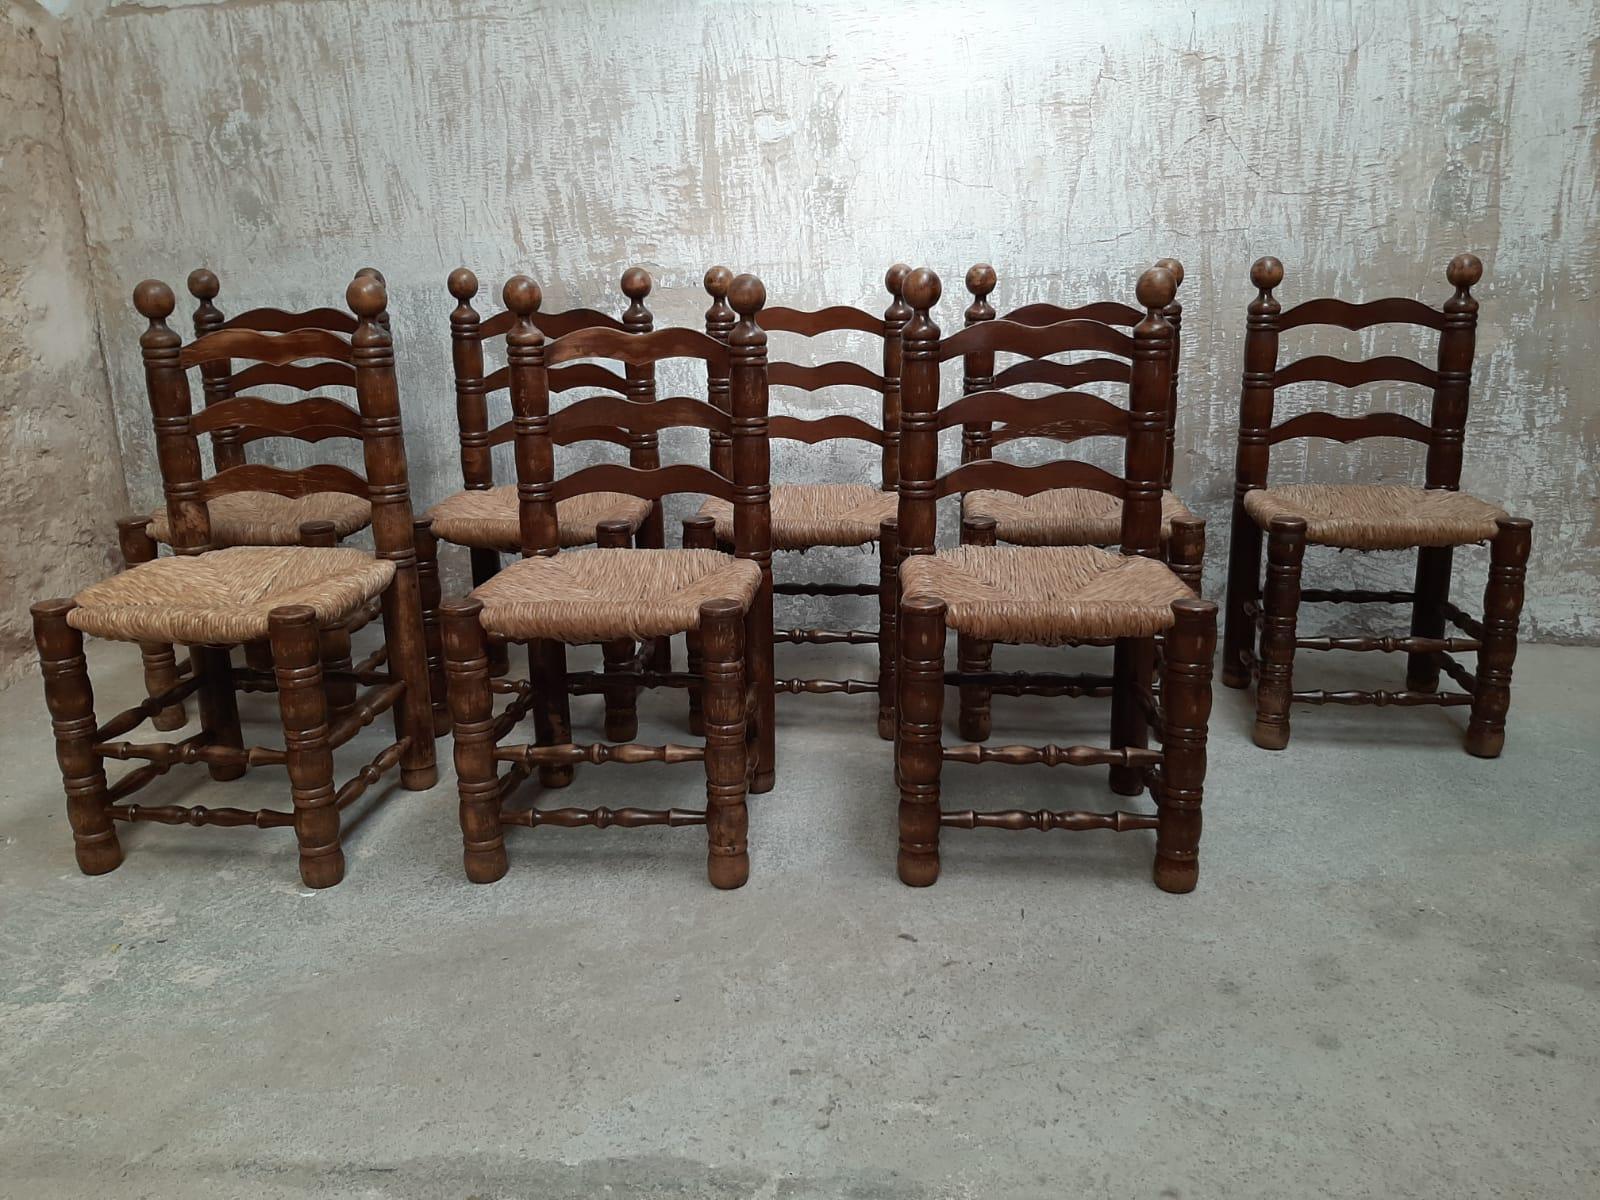 SET of 8, Vintage French Dining Ladder Back chairs in the Style of Charles Dudouyt, circa 1940s
Beautiful natural and original oak frames with woven rush seats, solid and sturdy construction
The style of the design is reminiscent of the designer